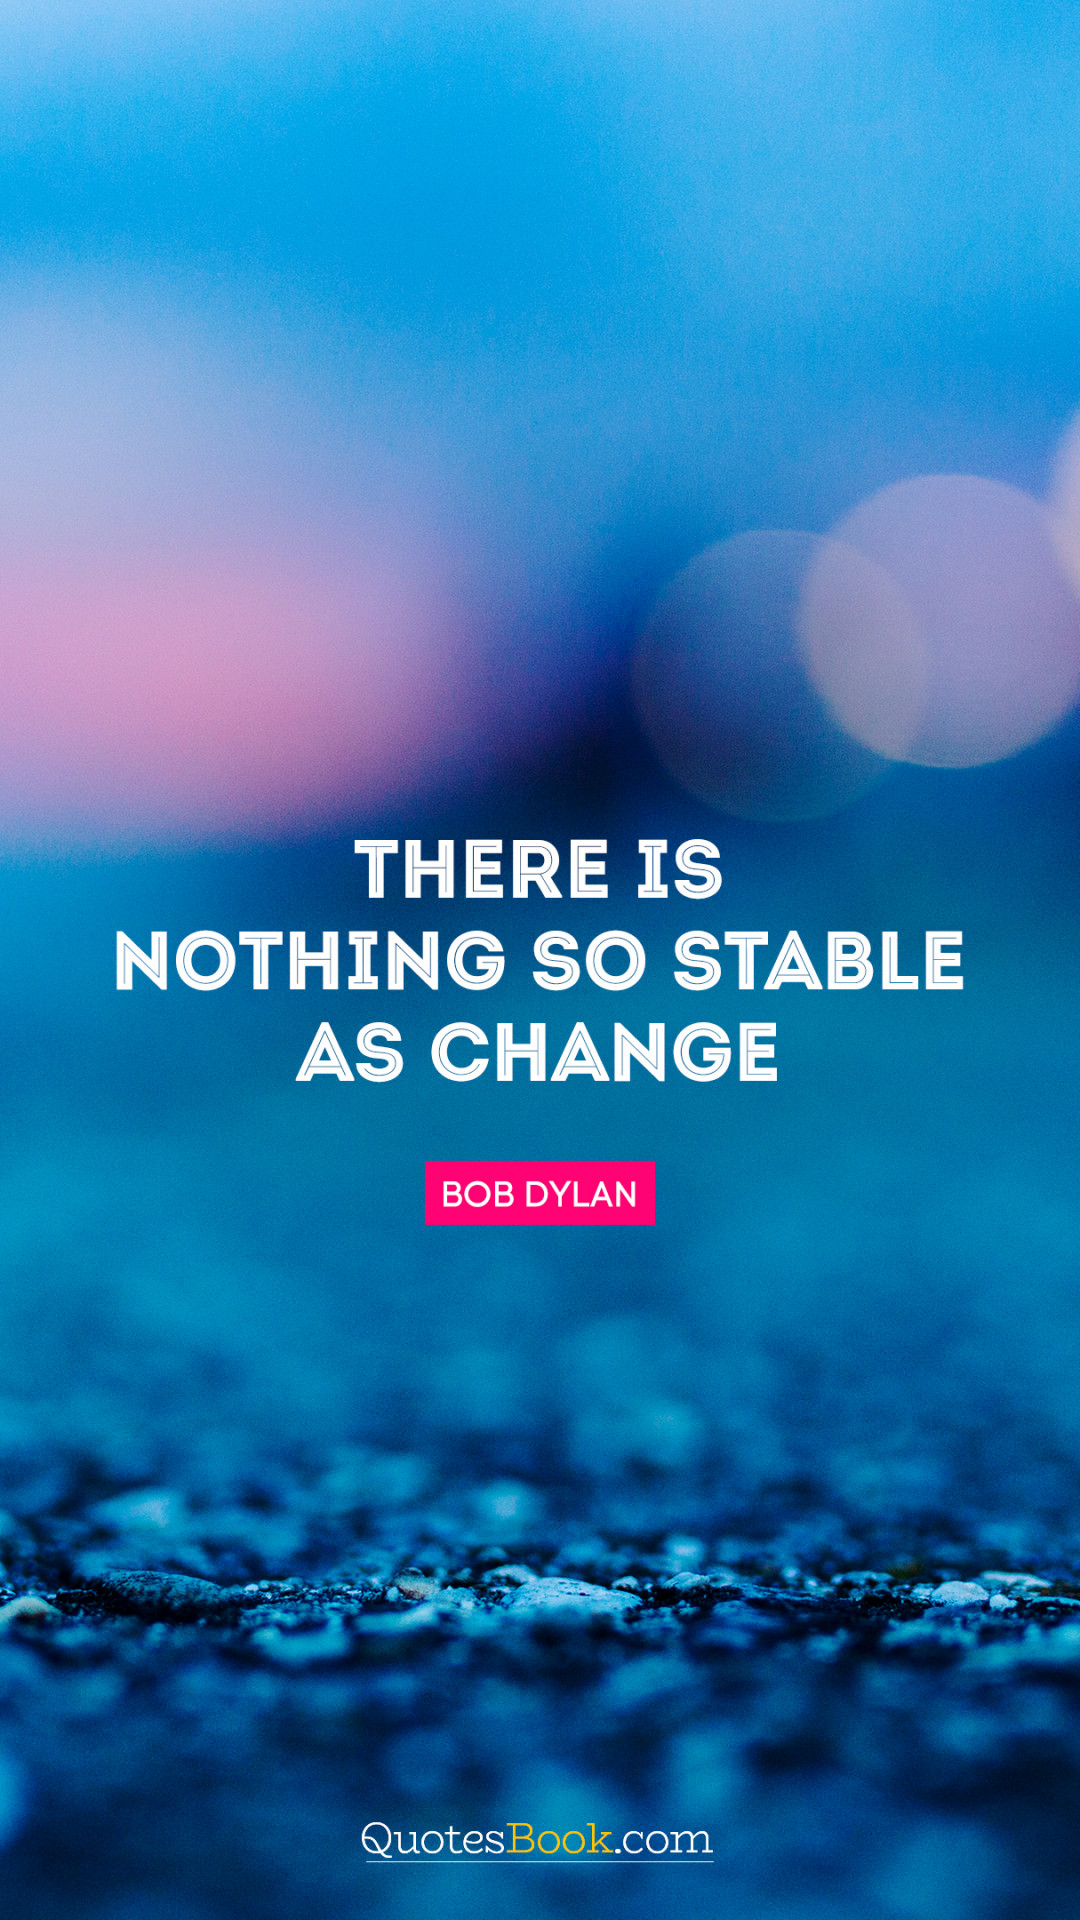 There is nothing so stable as change. Quote by Bob Dylan